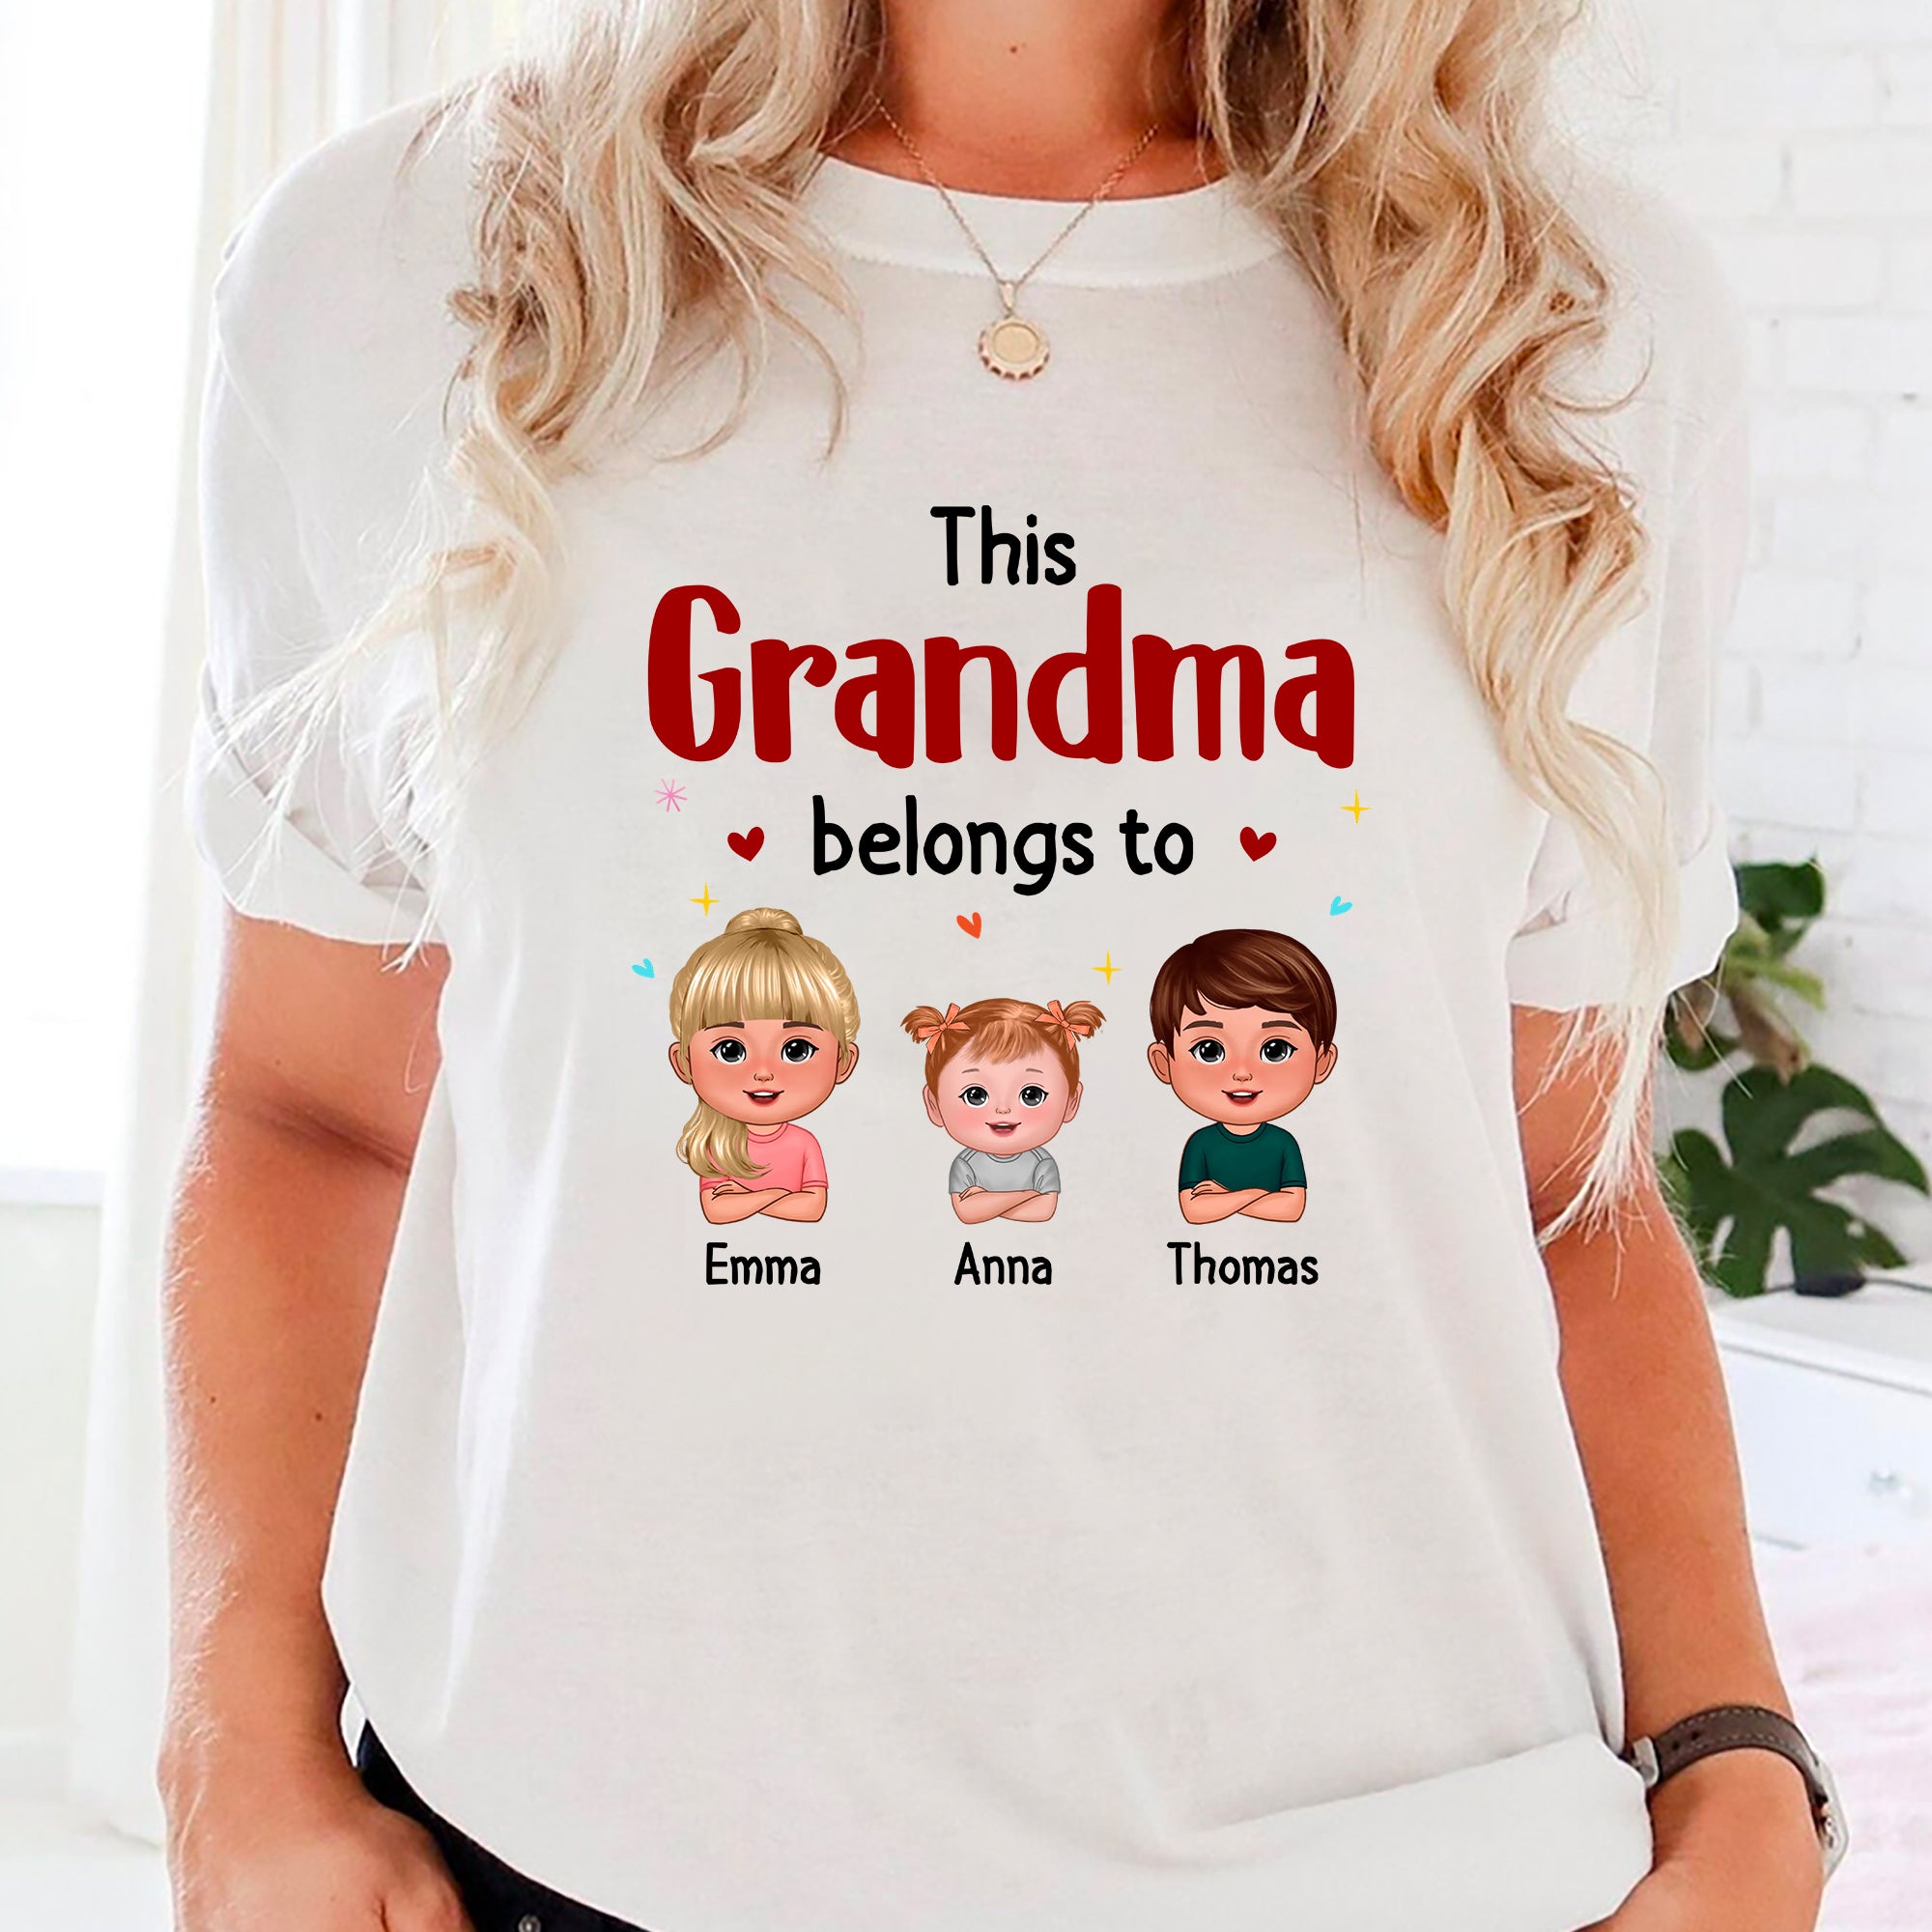 This Grandma Belongs To, Happy Mother's Day, Custom Appearances And Texts - Personalized Light Shirt